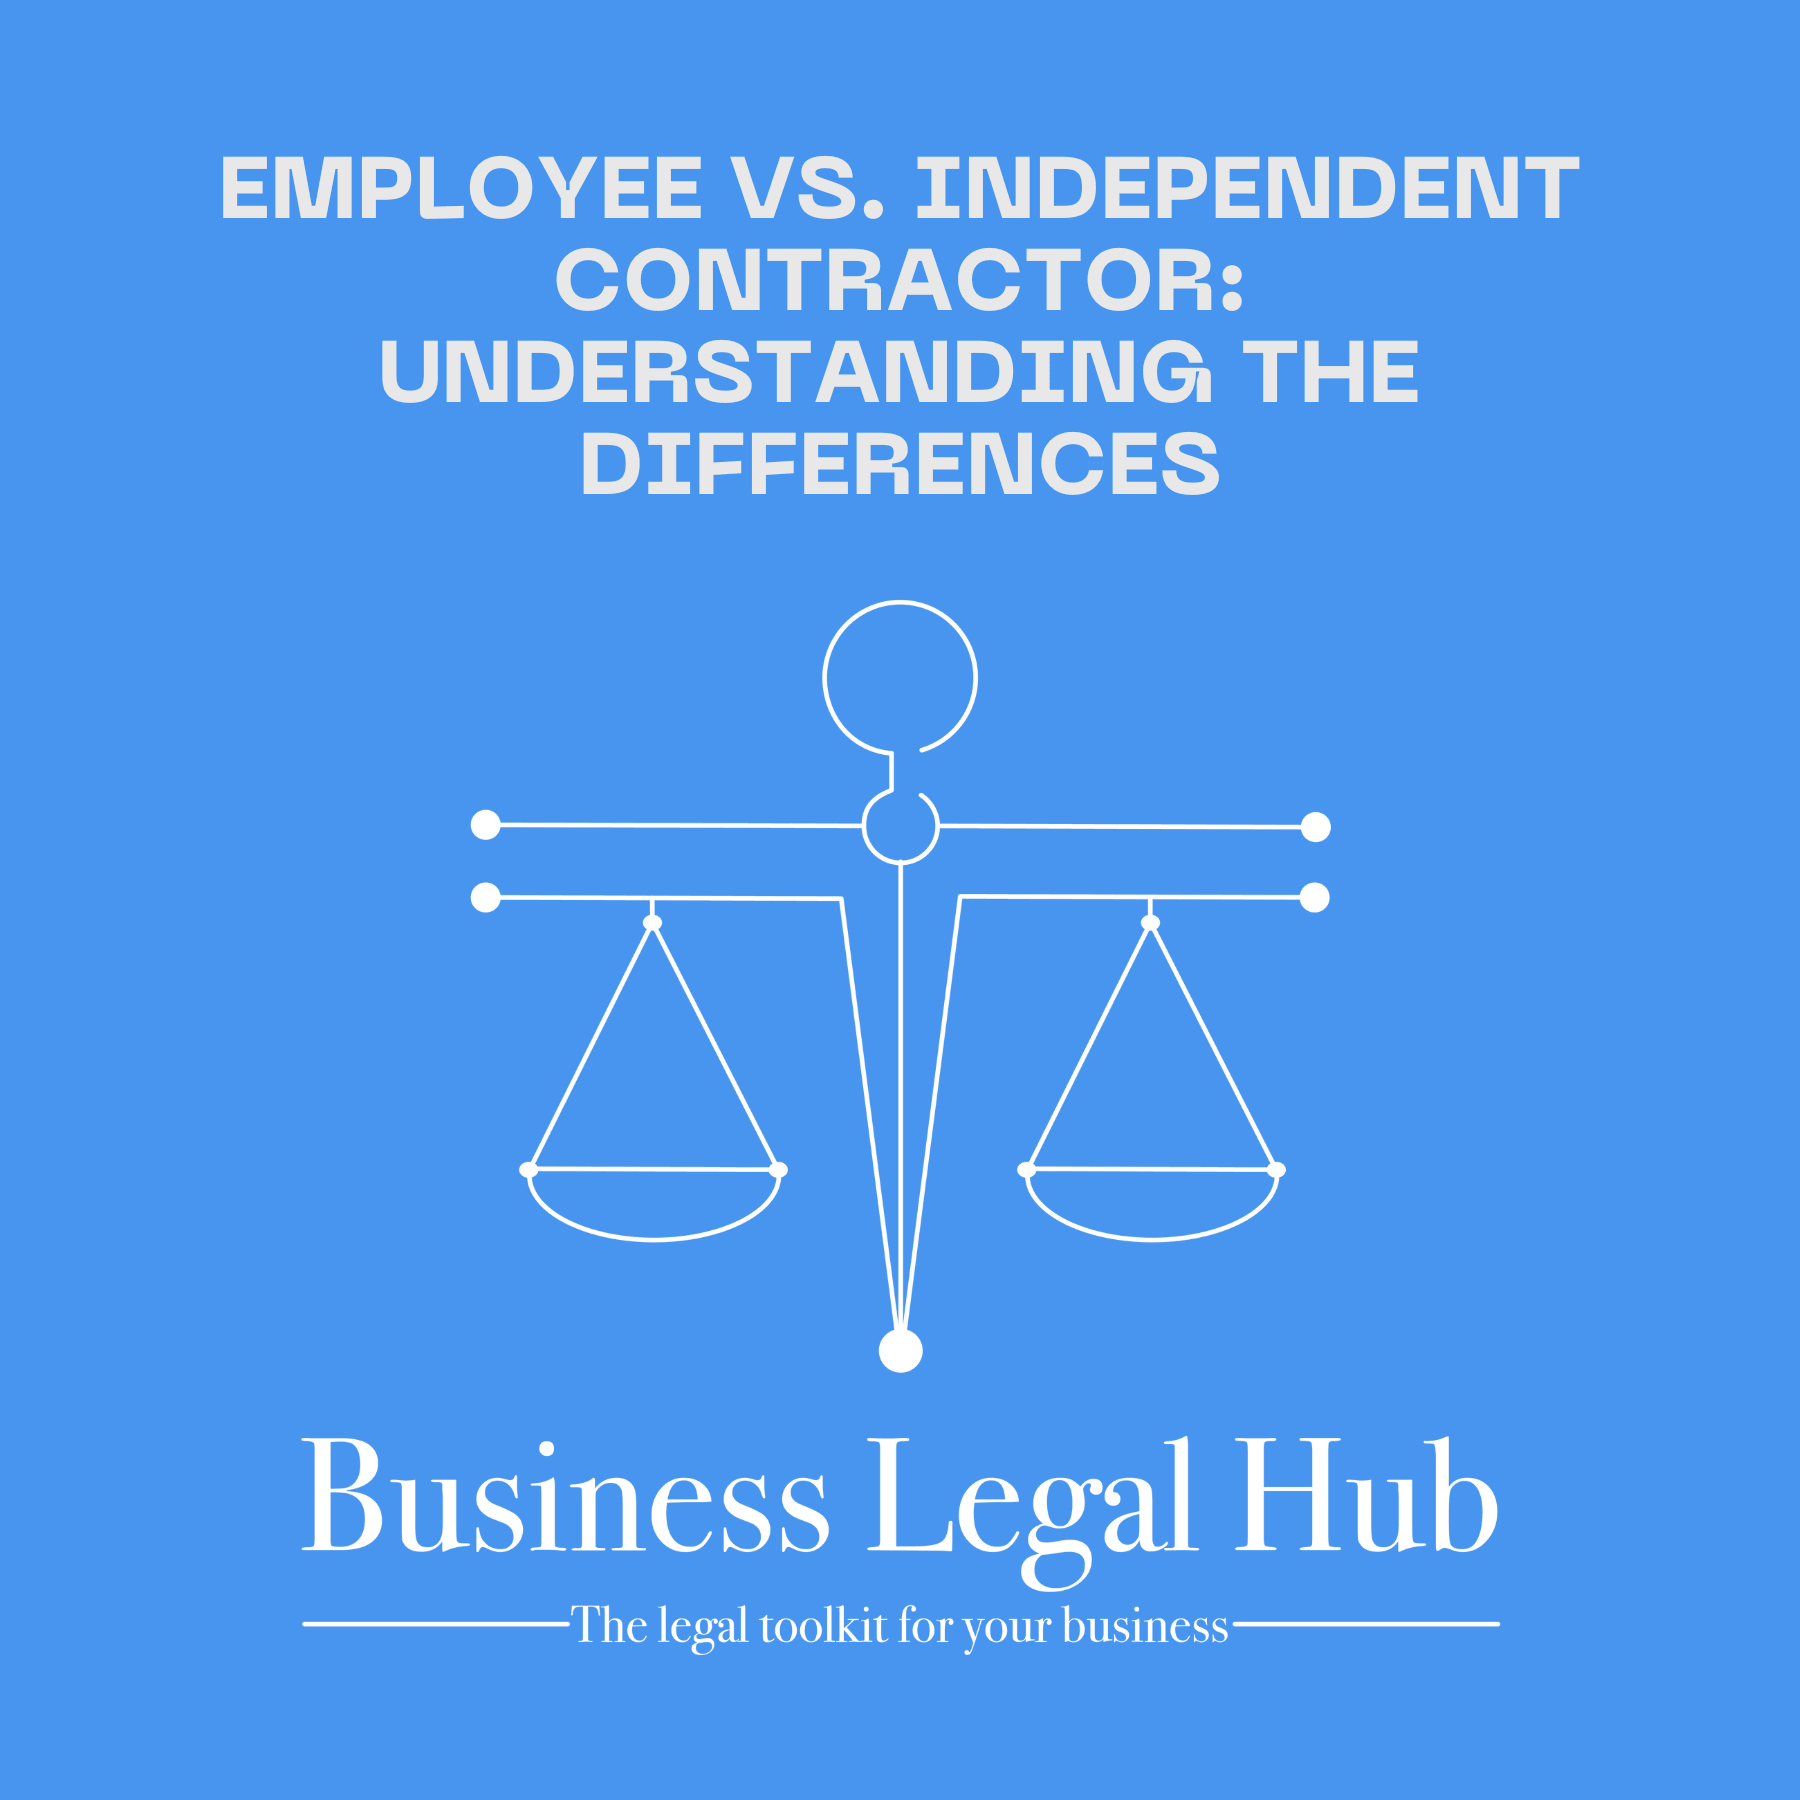 Employee vs. Independent Contractor: Understanding the Differences - Business Legal Hub